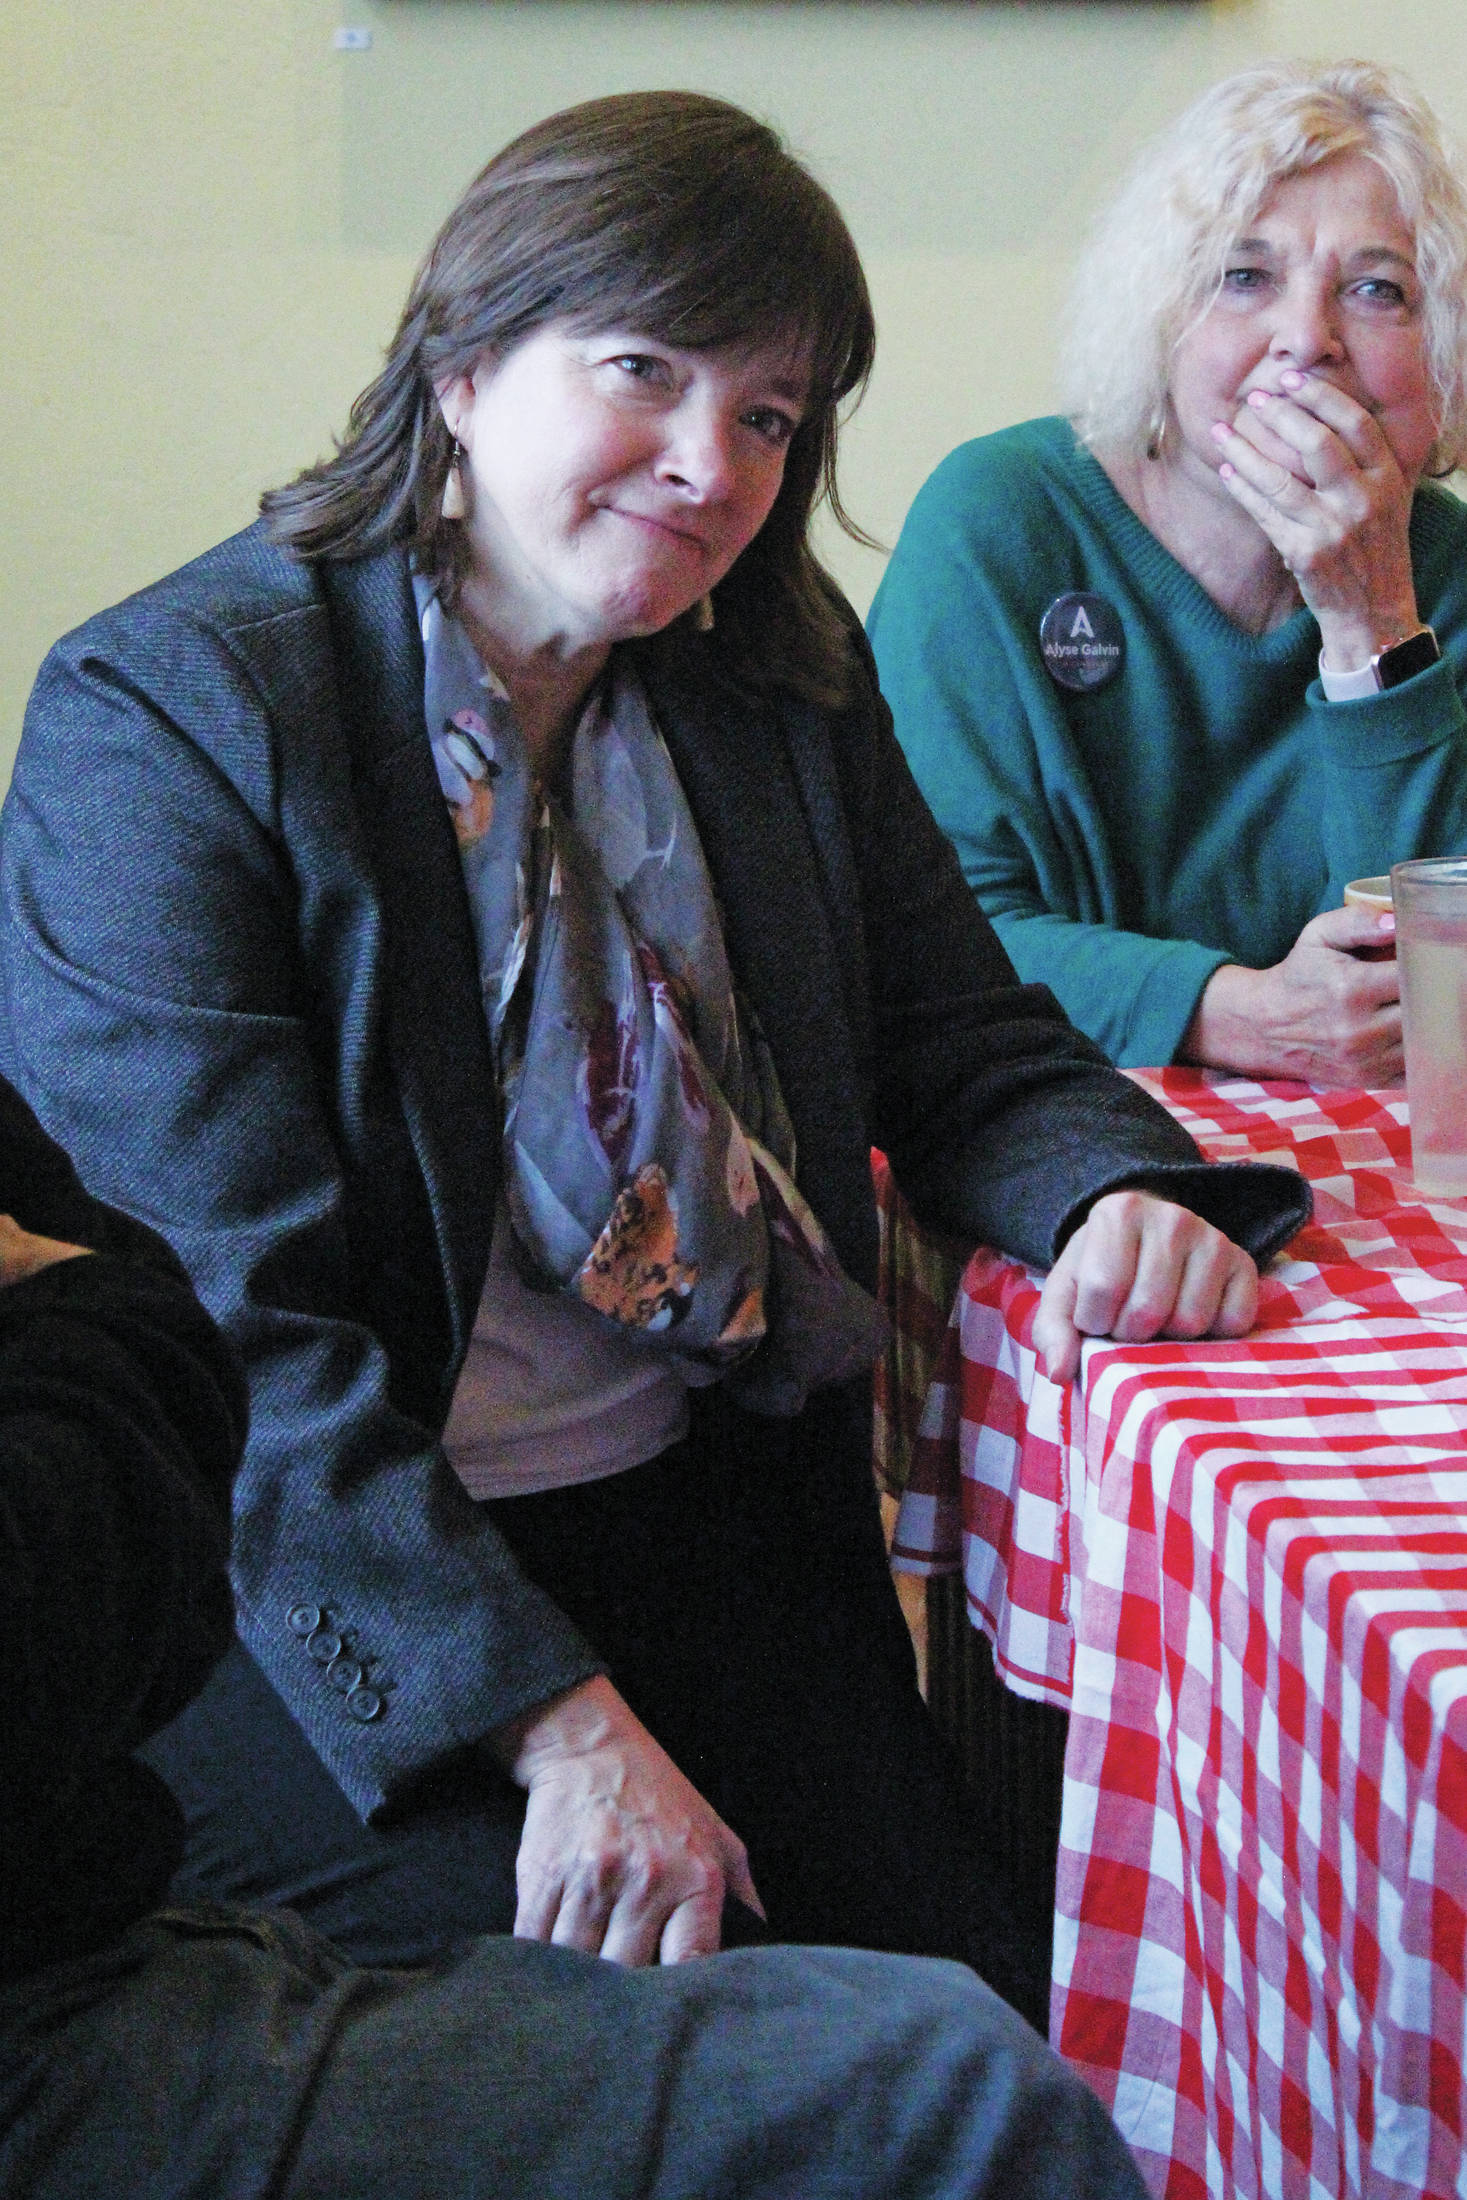 Alyse Galvin, who is running for the Alaska seat in the U.S. House of Representatives, listens to a community member speak during a meet and greet Sunday. Dec. 1, 2019 at K-Bay Caffee in Homer, Alaska. Galvin first ran to unseat Rep. Don Young in 2018. (Photo by Megan Pacer/Homer News)